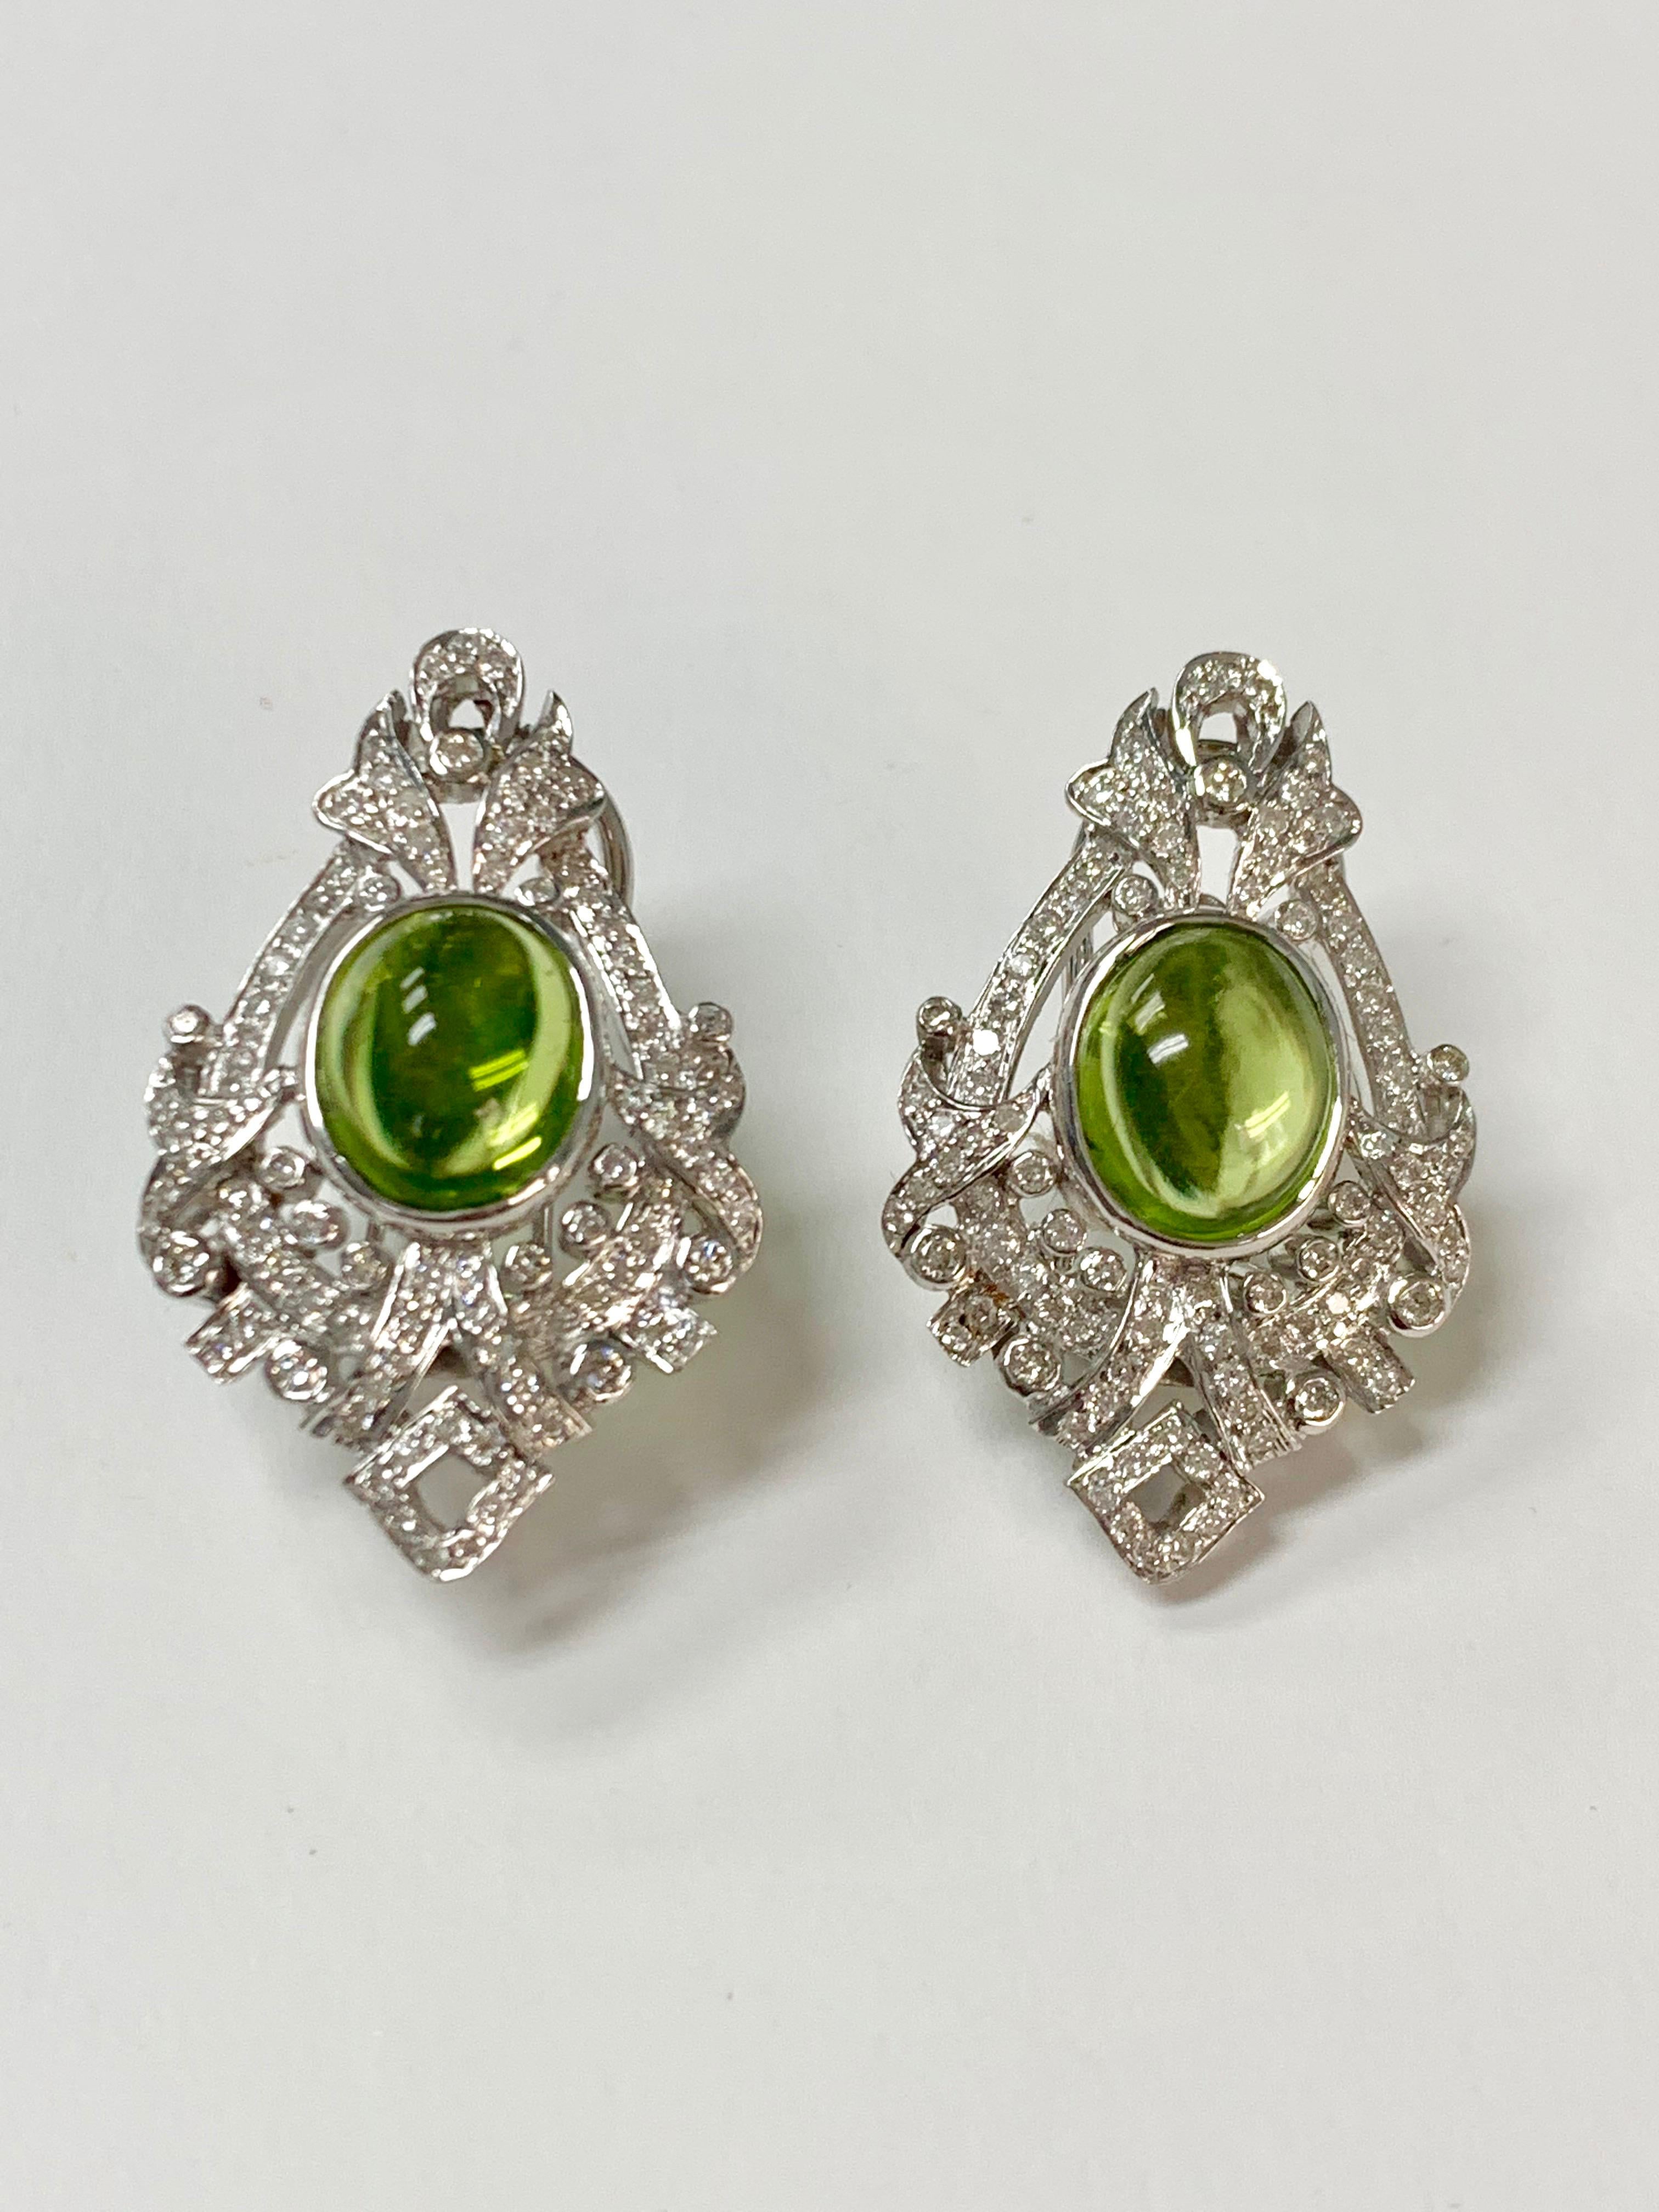 Oval Cut Diamond and Peridot Stud Earrings in 18k White Gold For Sale